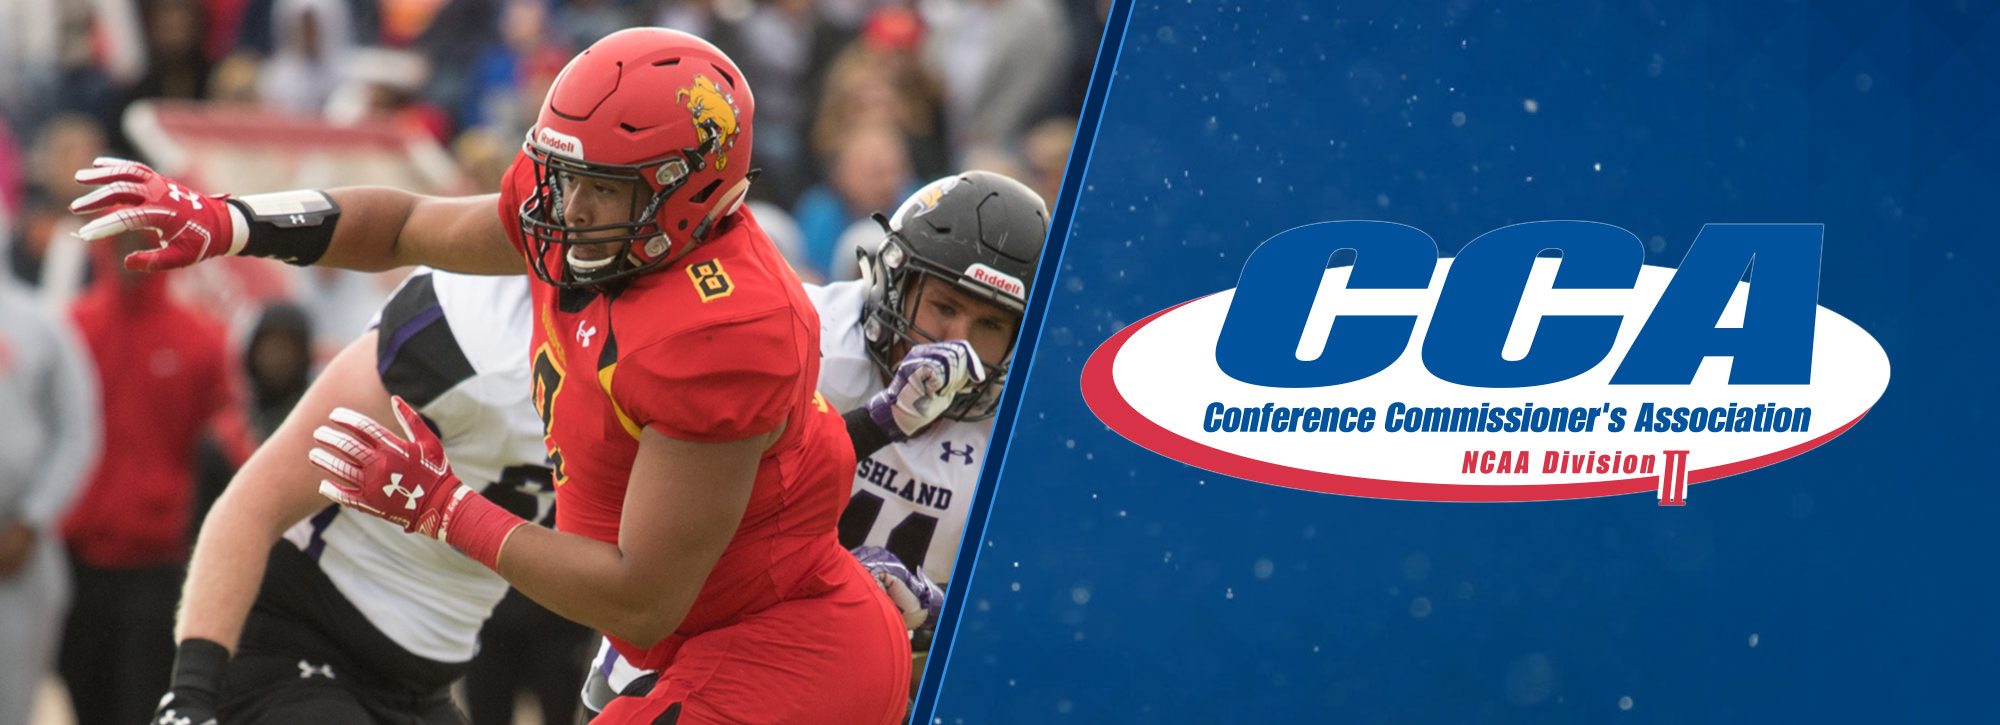 Ferris State's Edwards Named D2CCA Super Region 3 Defensive Player of the Year; 11 Honored